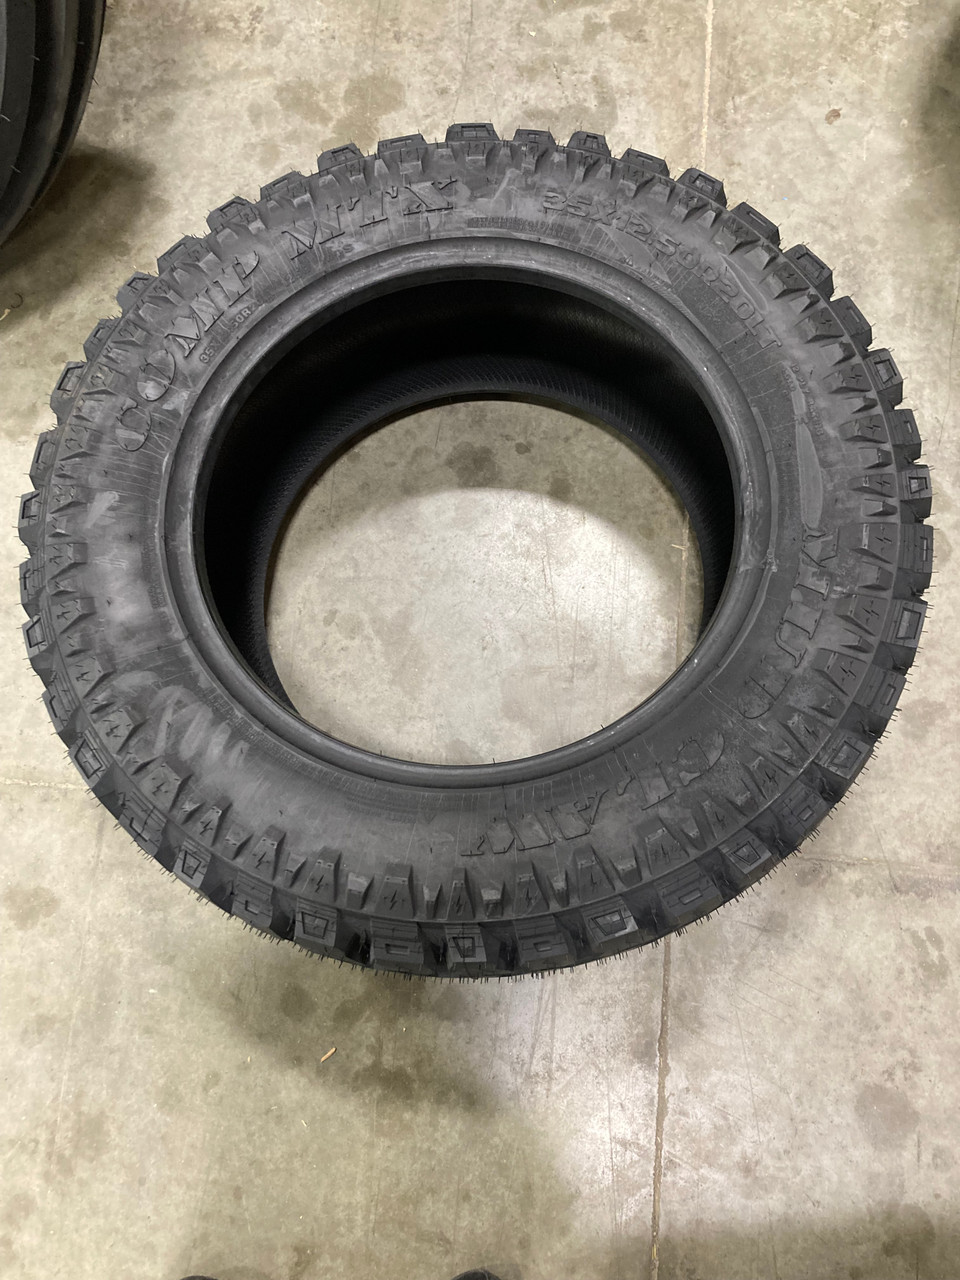 New Tire 285 70 17 Mud Claw Comp MTX 10 ply LT285/70R17